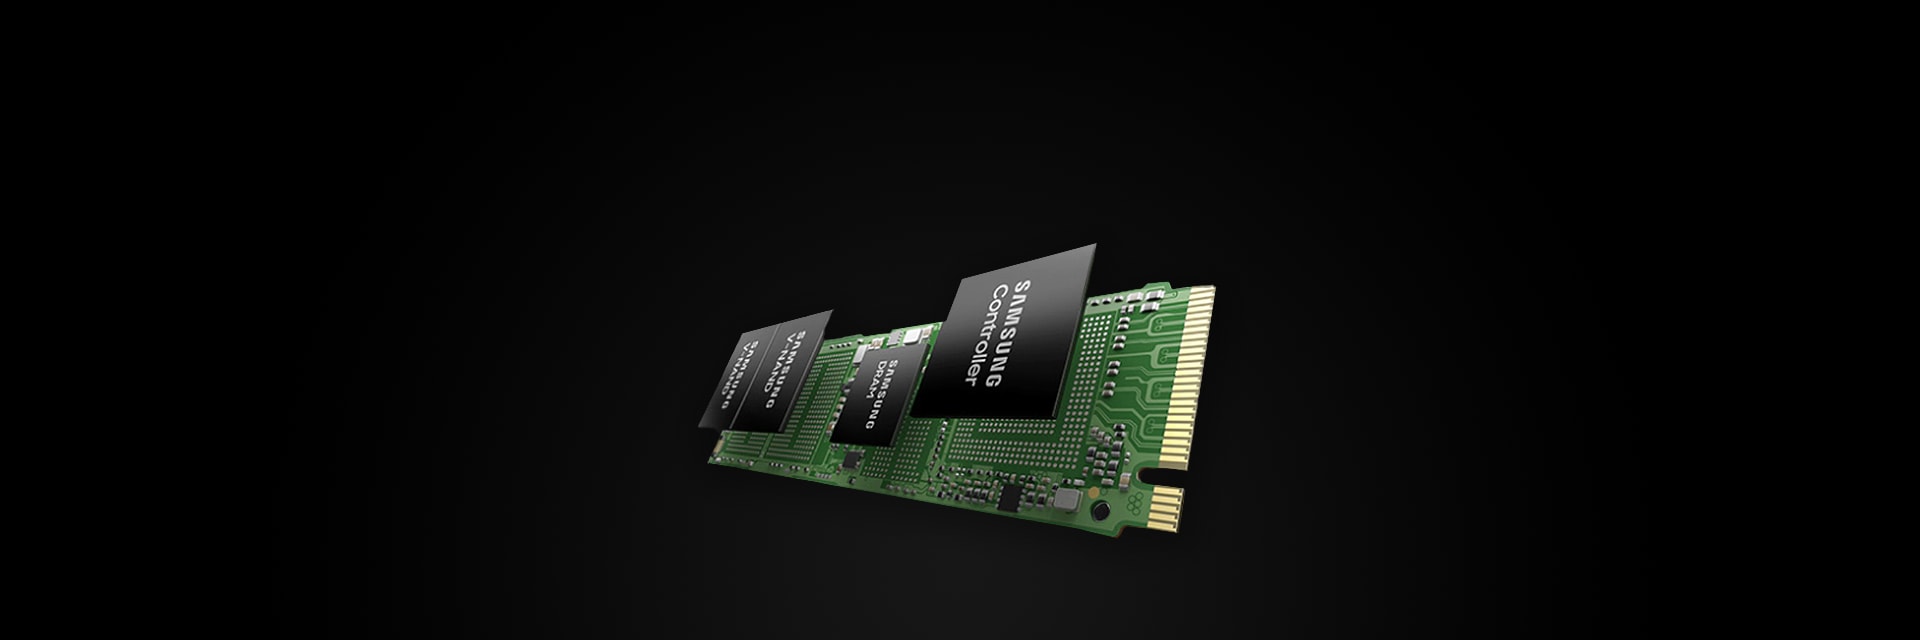 Samsung Semiconductor Client SSD, New SSD performance for PCs